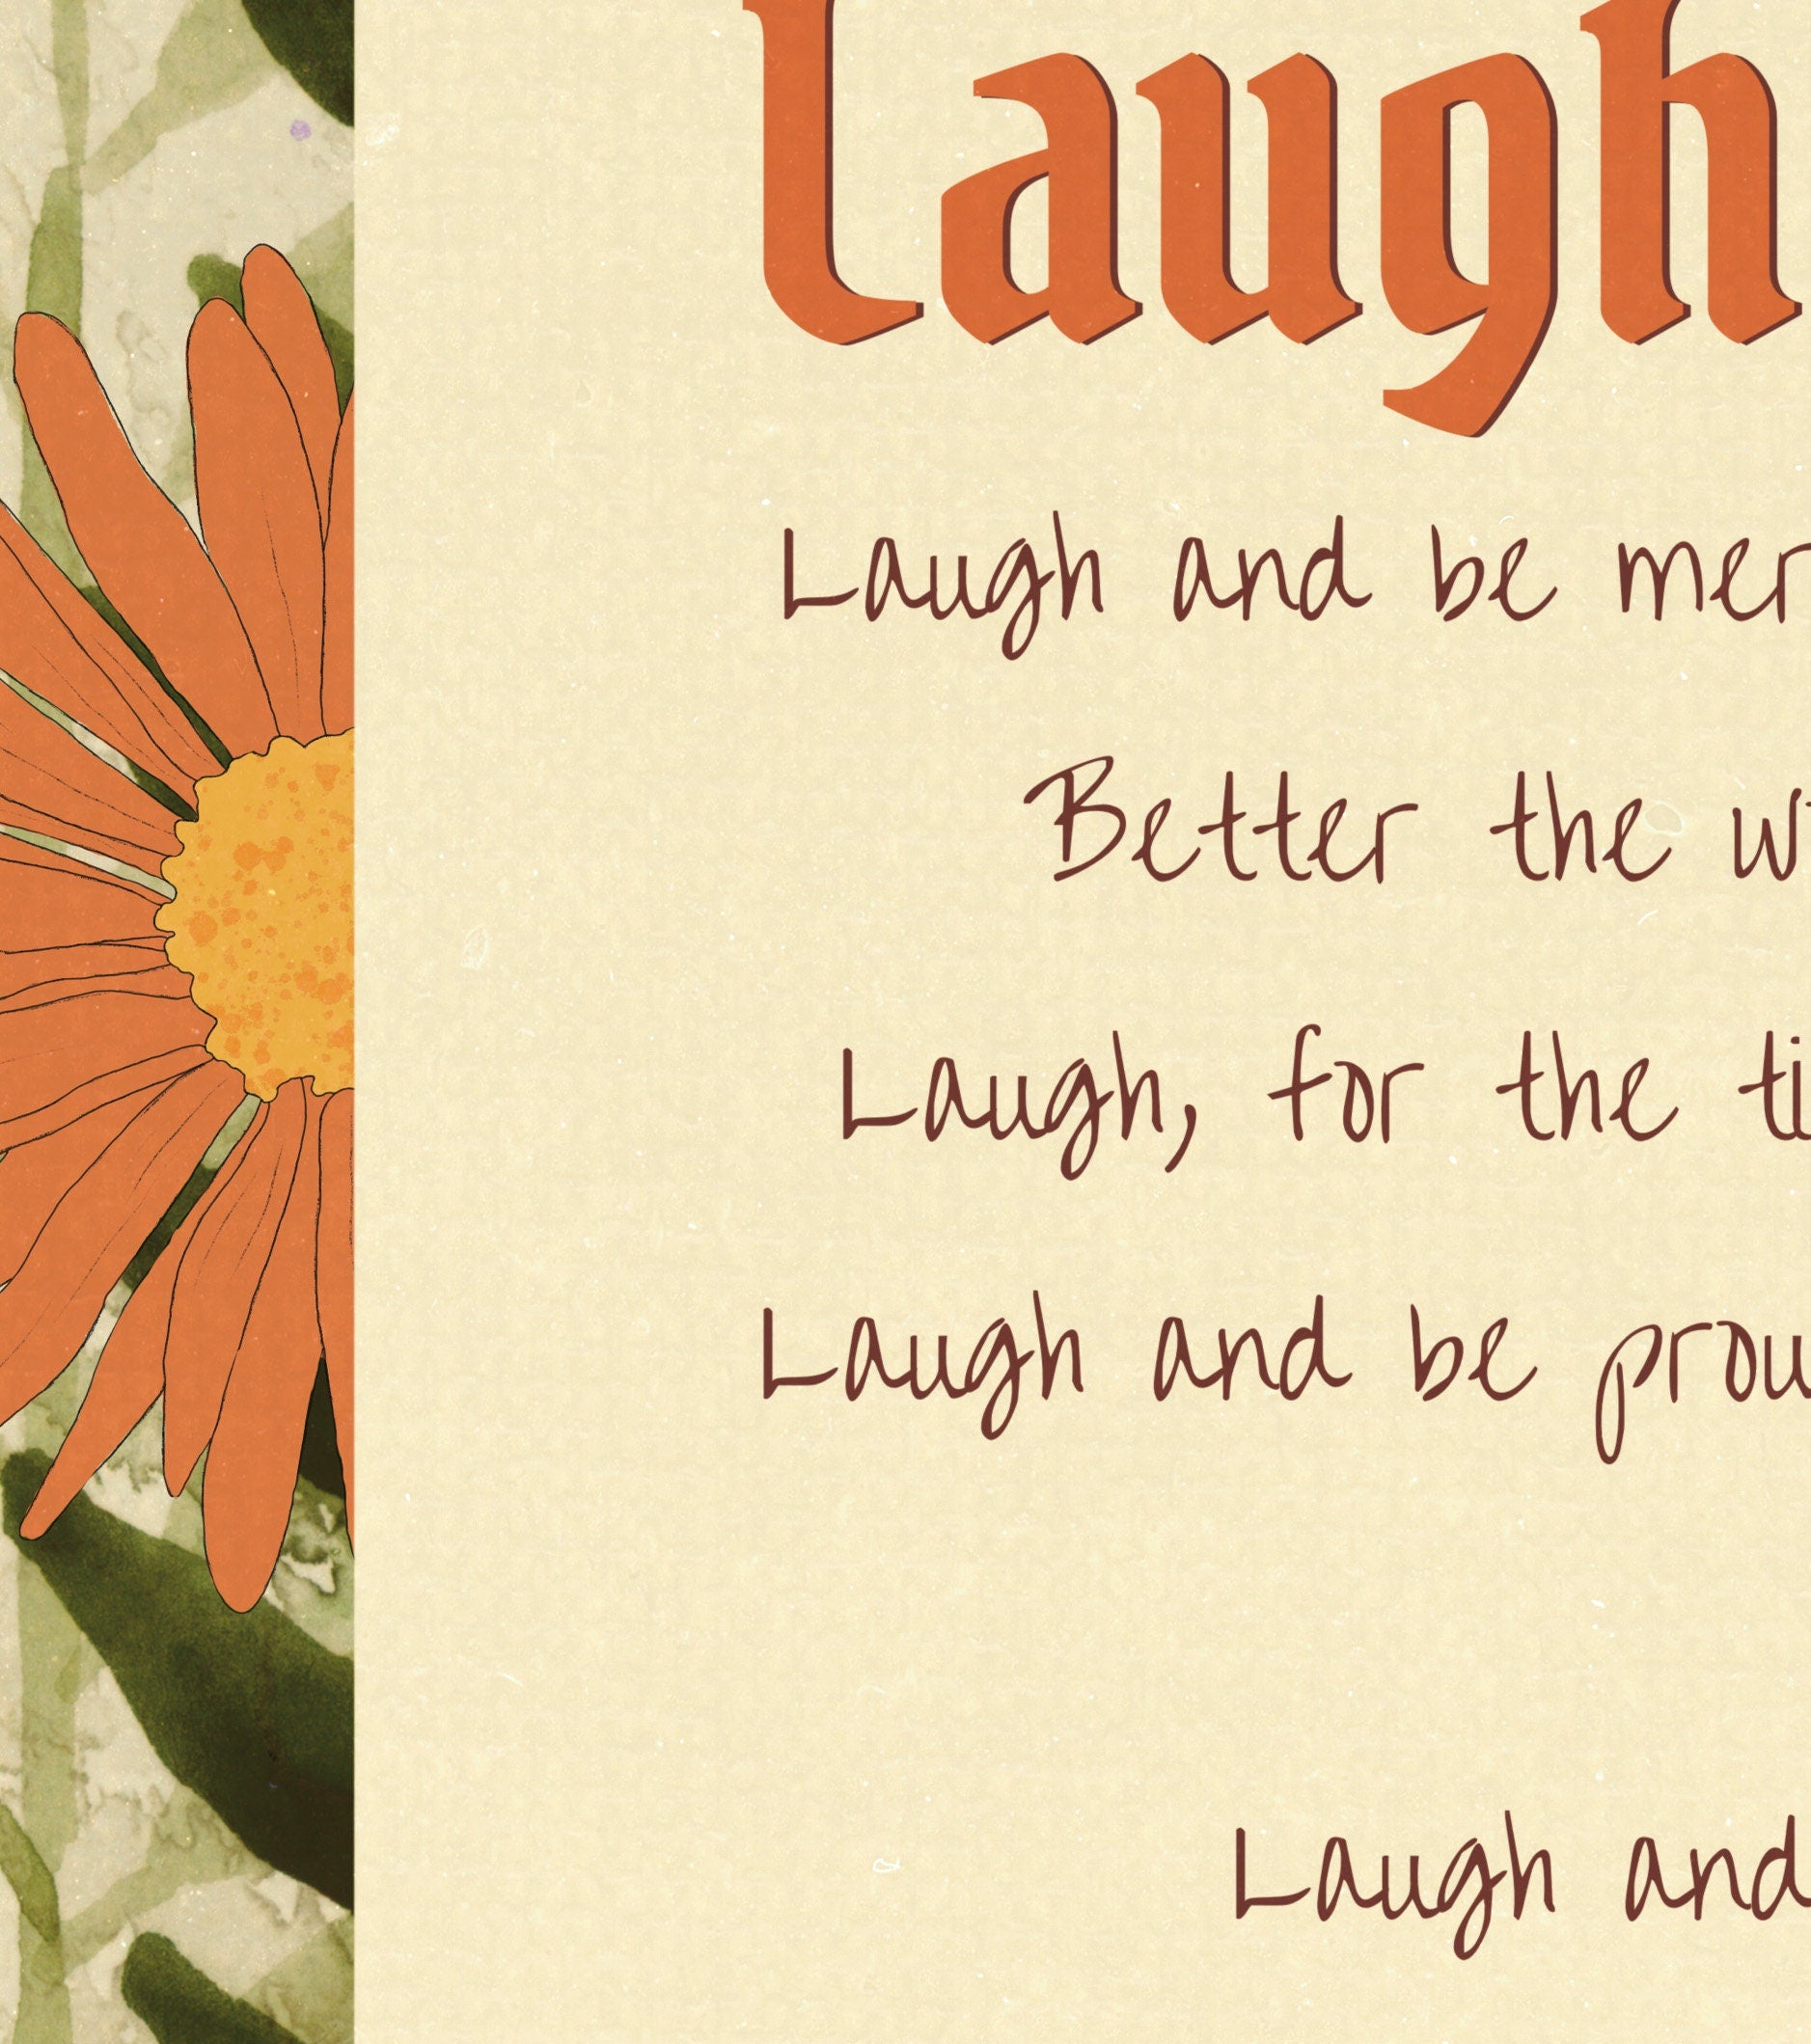 Laugh & Be Merry Poem, Inspirational Poem, Poetry Art Print with Floral Design, Happy Wall Decor